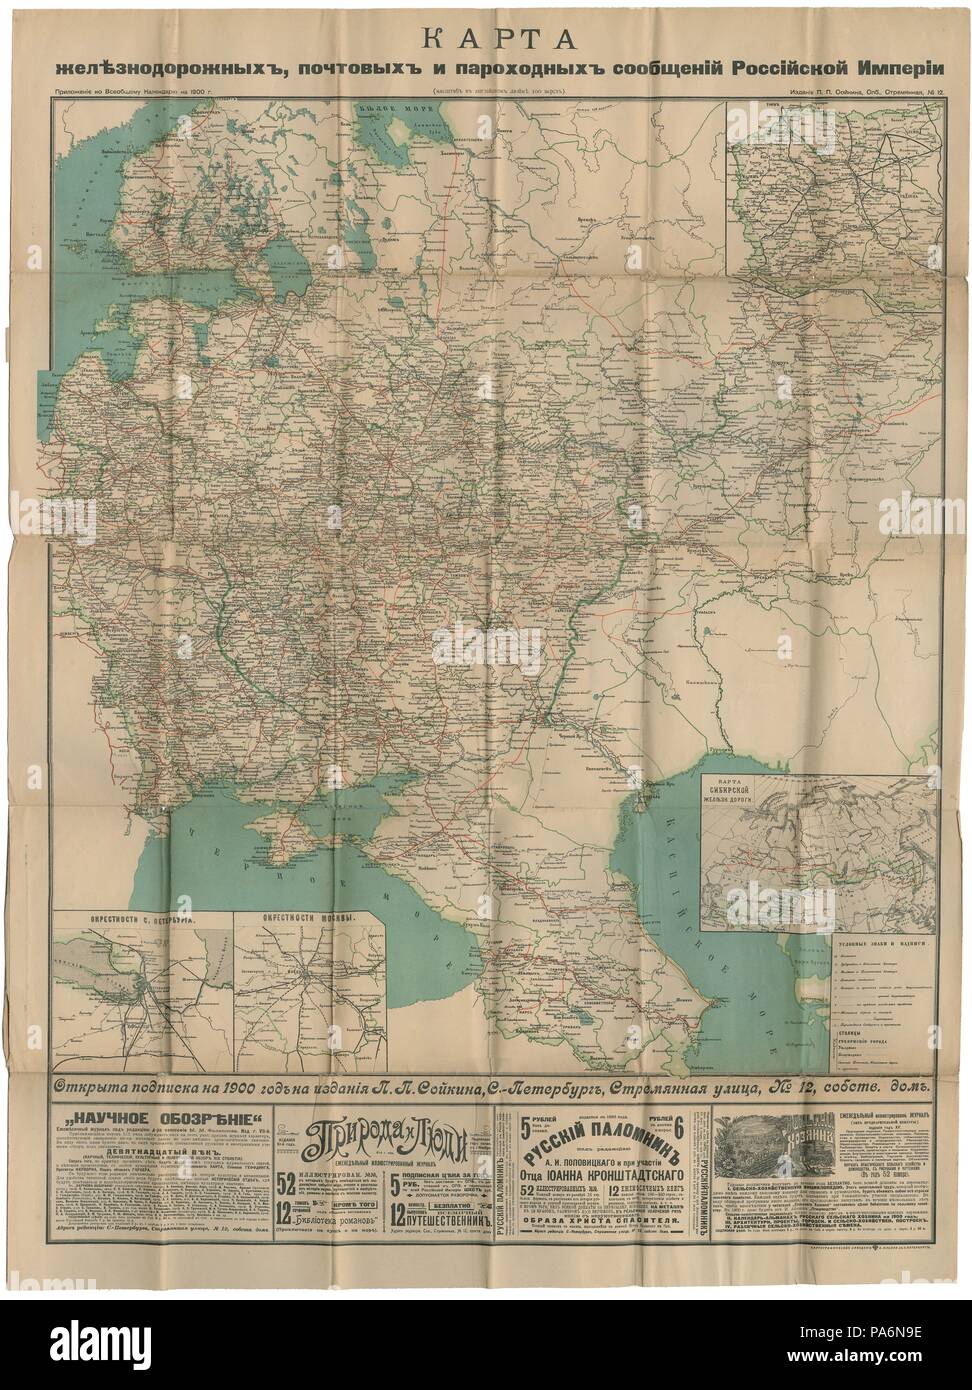 Map of Roads, Railroads and Inland Waterways of the Russian Empire, 1899. Museum: PRIVATE COLLECTION. Stock Photo